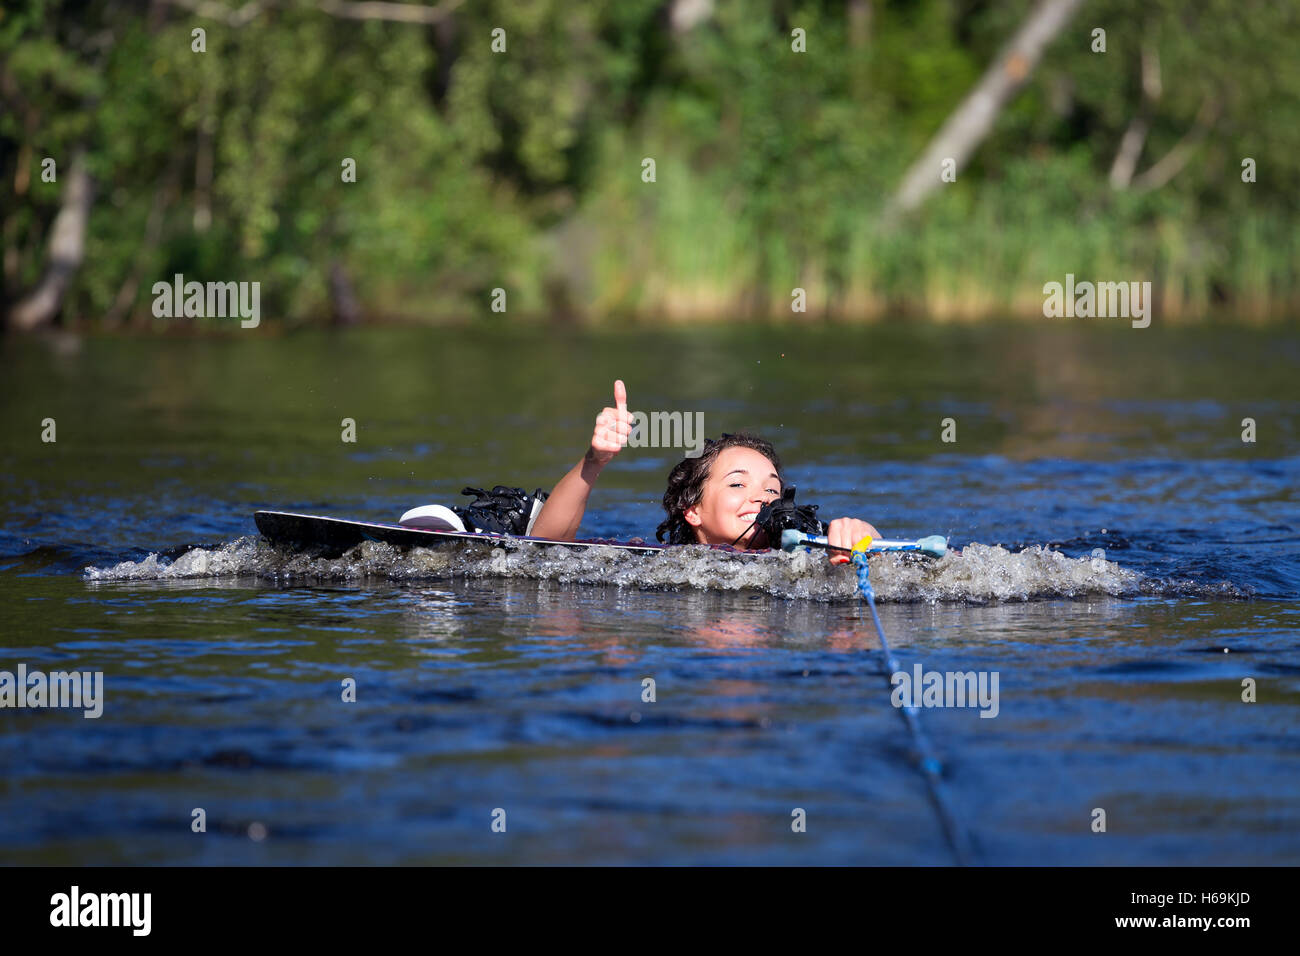 Young pretty slim brunette woman riding wakeboard on wave of motorboat in a summer lake Stock Photo